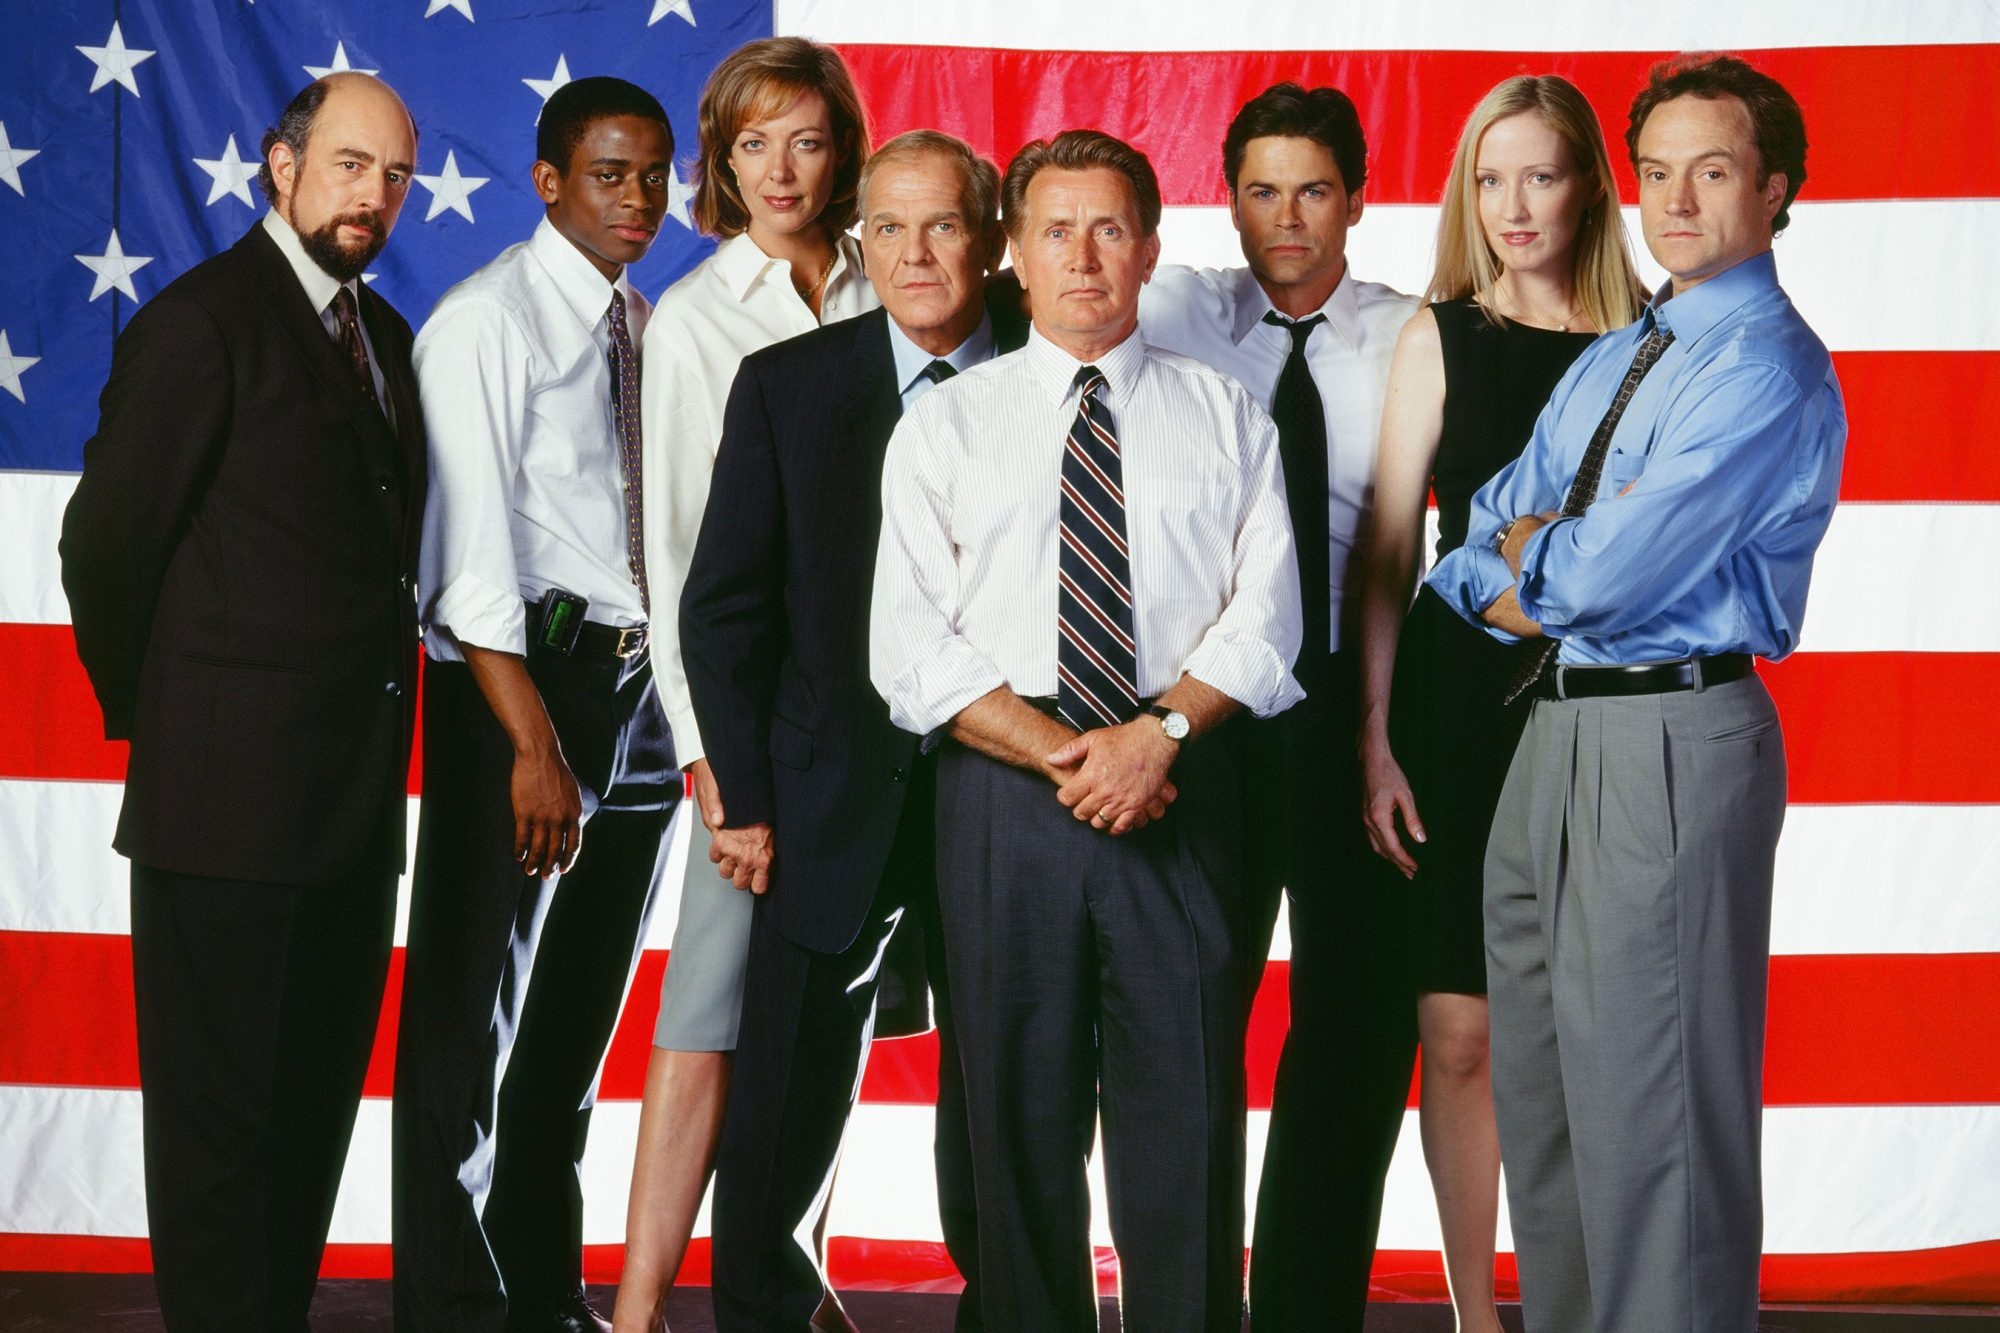 The West Wing (TV Series): An American political drama produced by Warner Bros. Television. 2000x1340 HD Wallpaper.